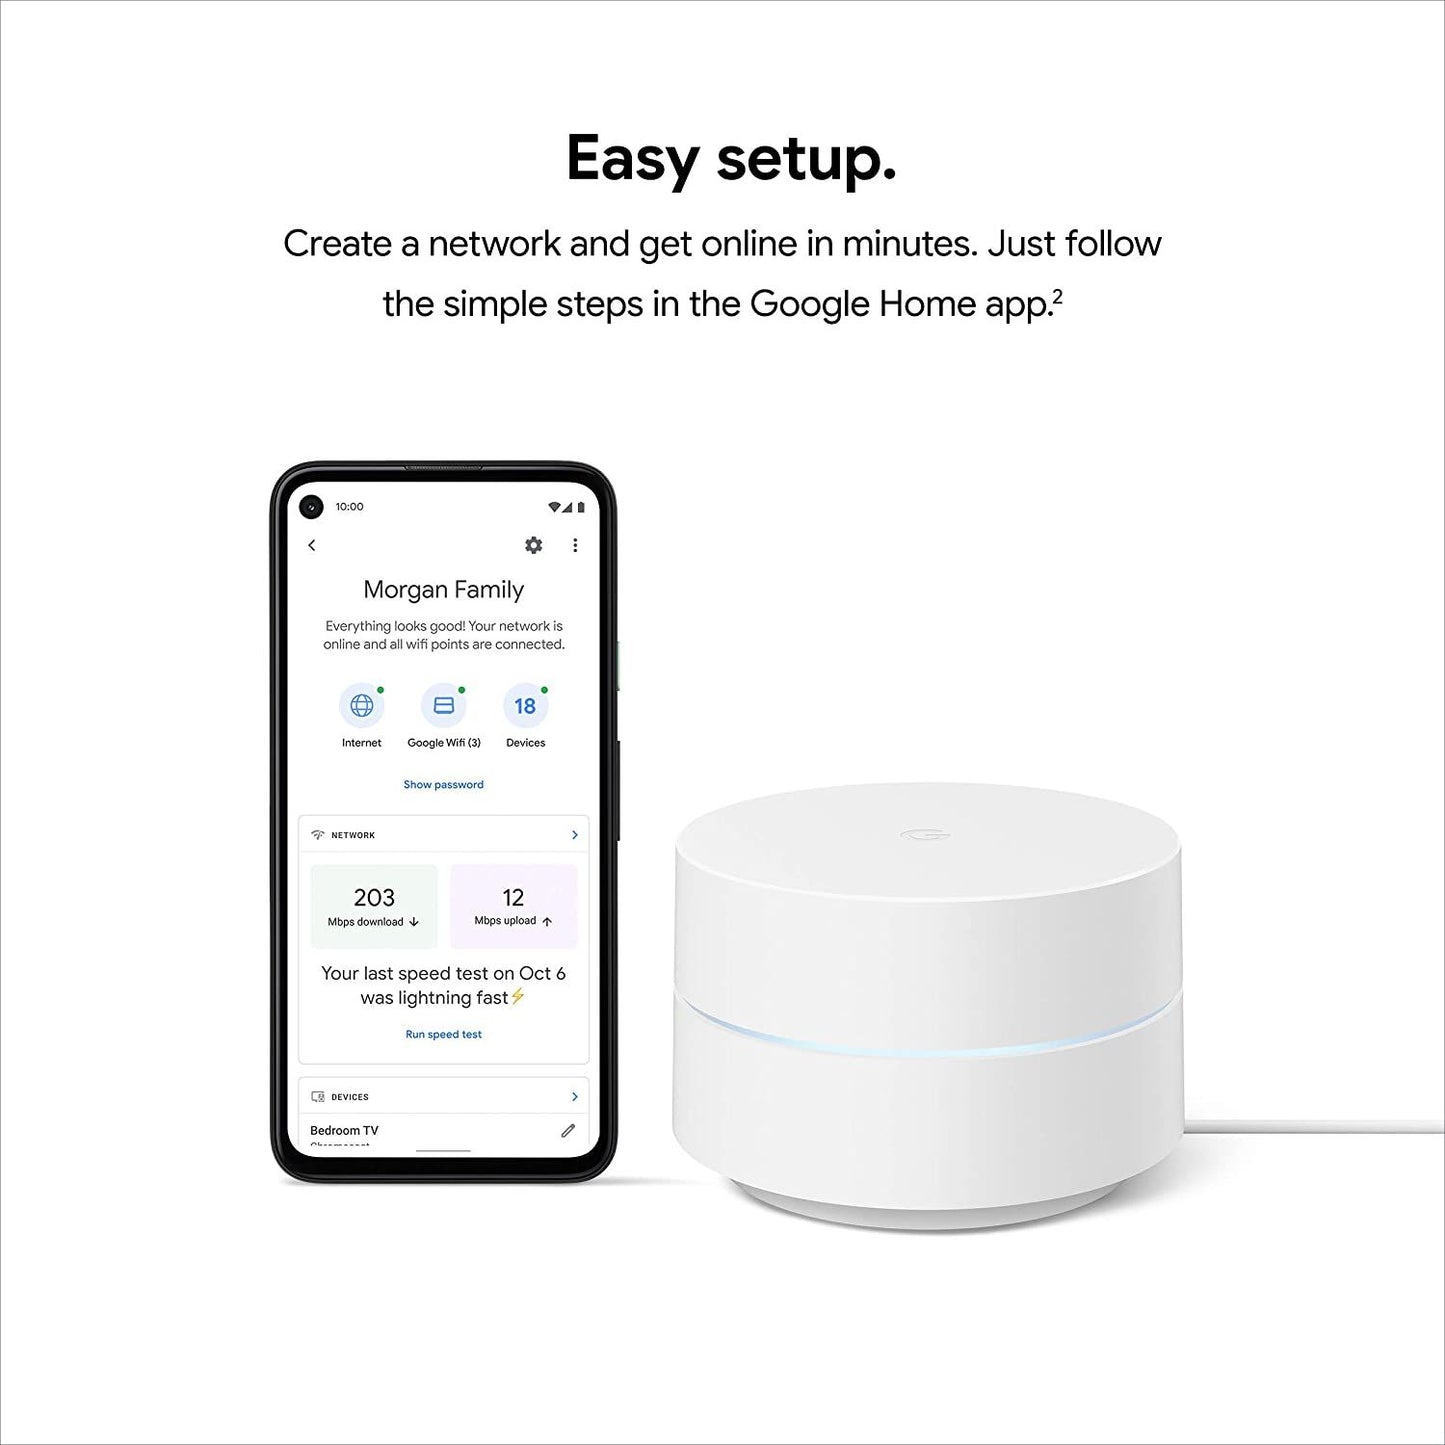 Google Wifi GA02430-US Mesh Network System Router AC1200 Point